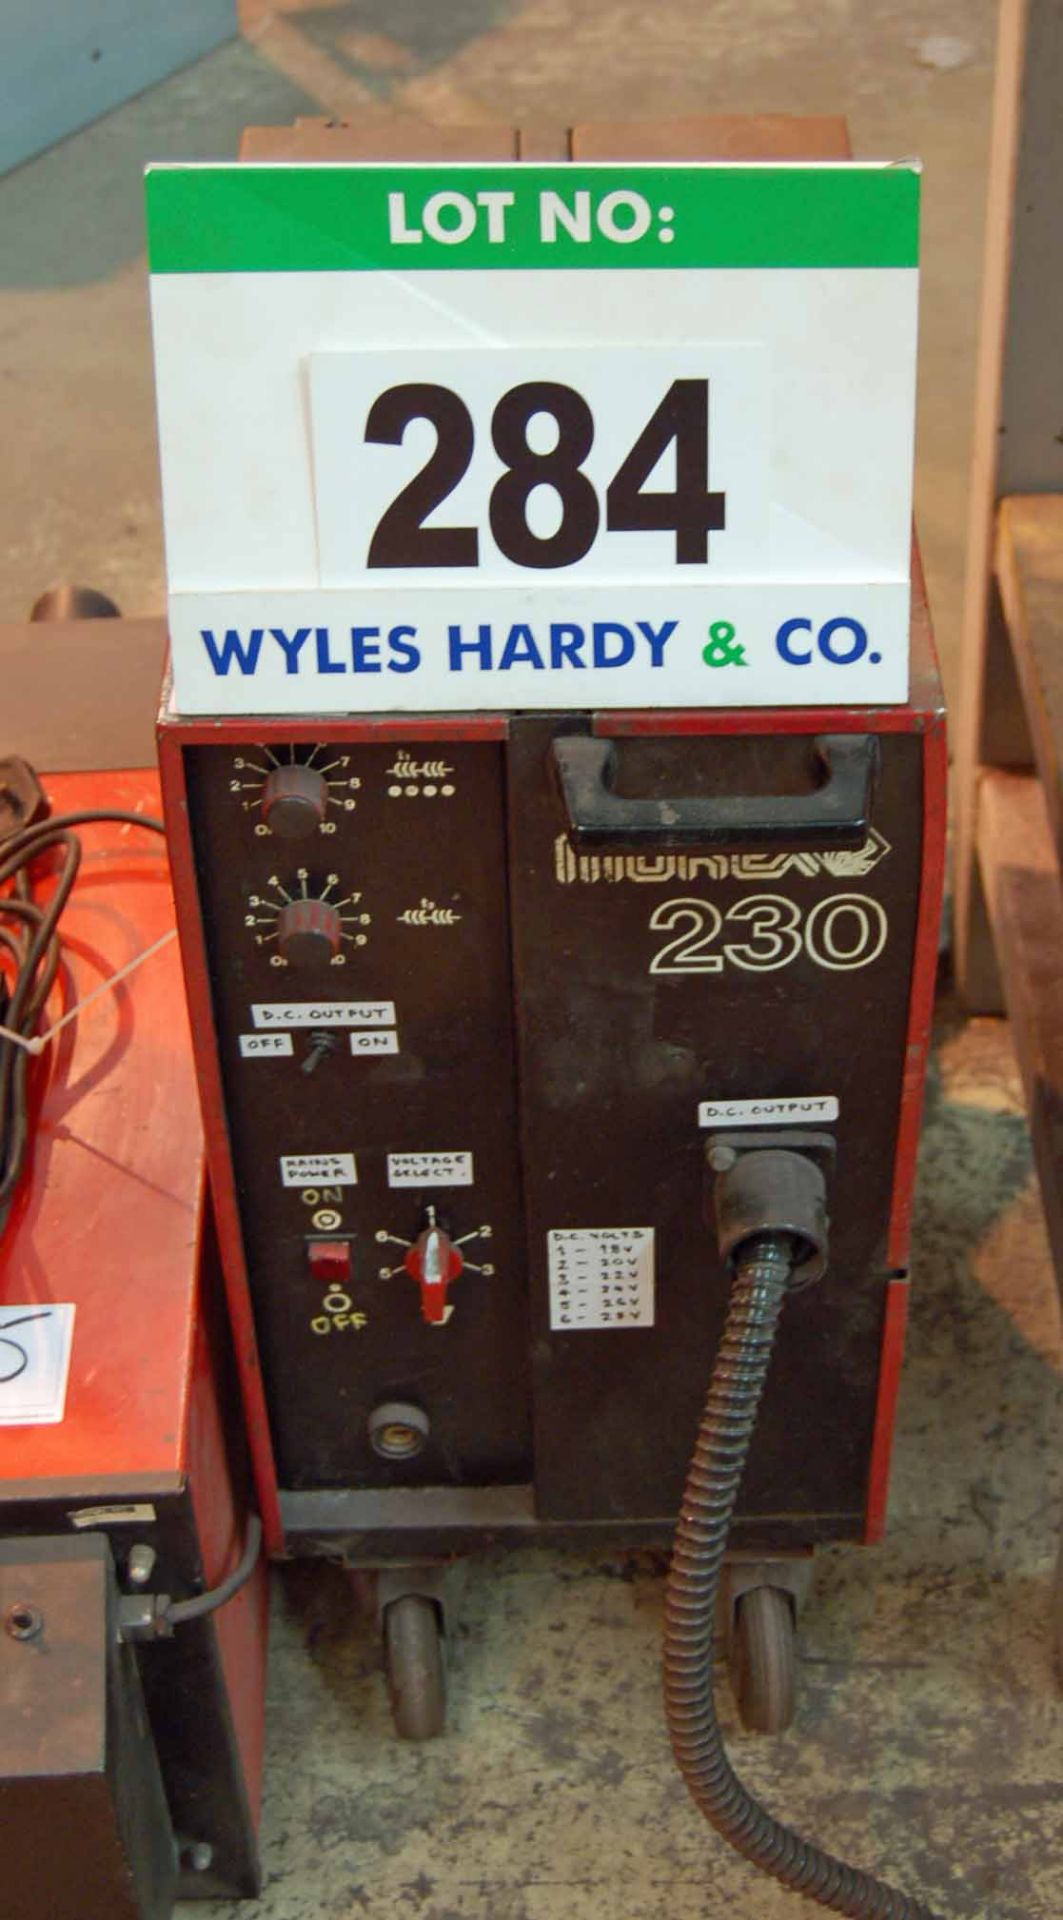 A MUREX TRADESMIG 230 Welding Rectifier - Not in Use (As Photographed)